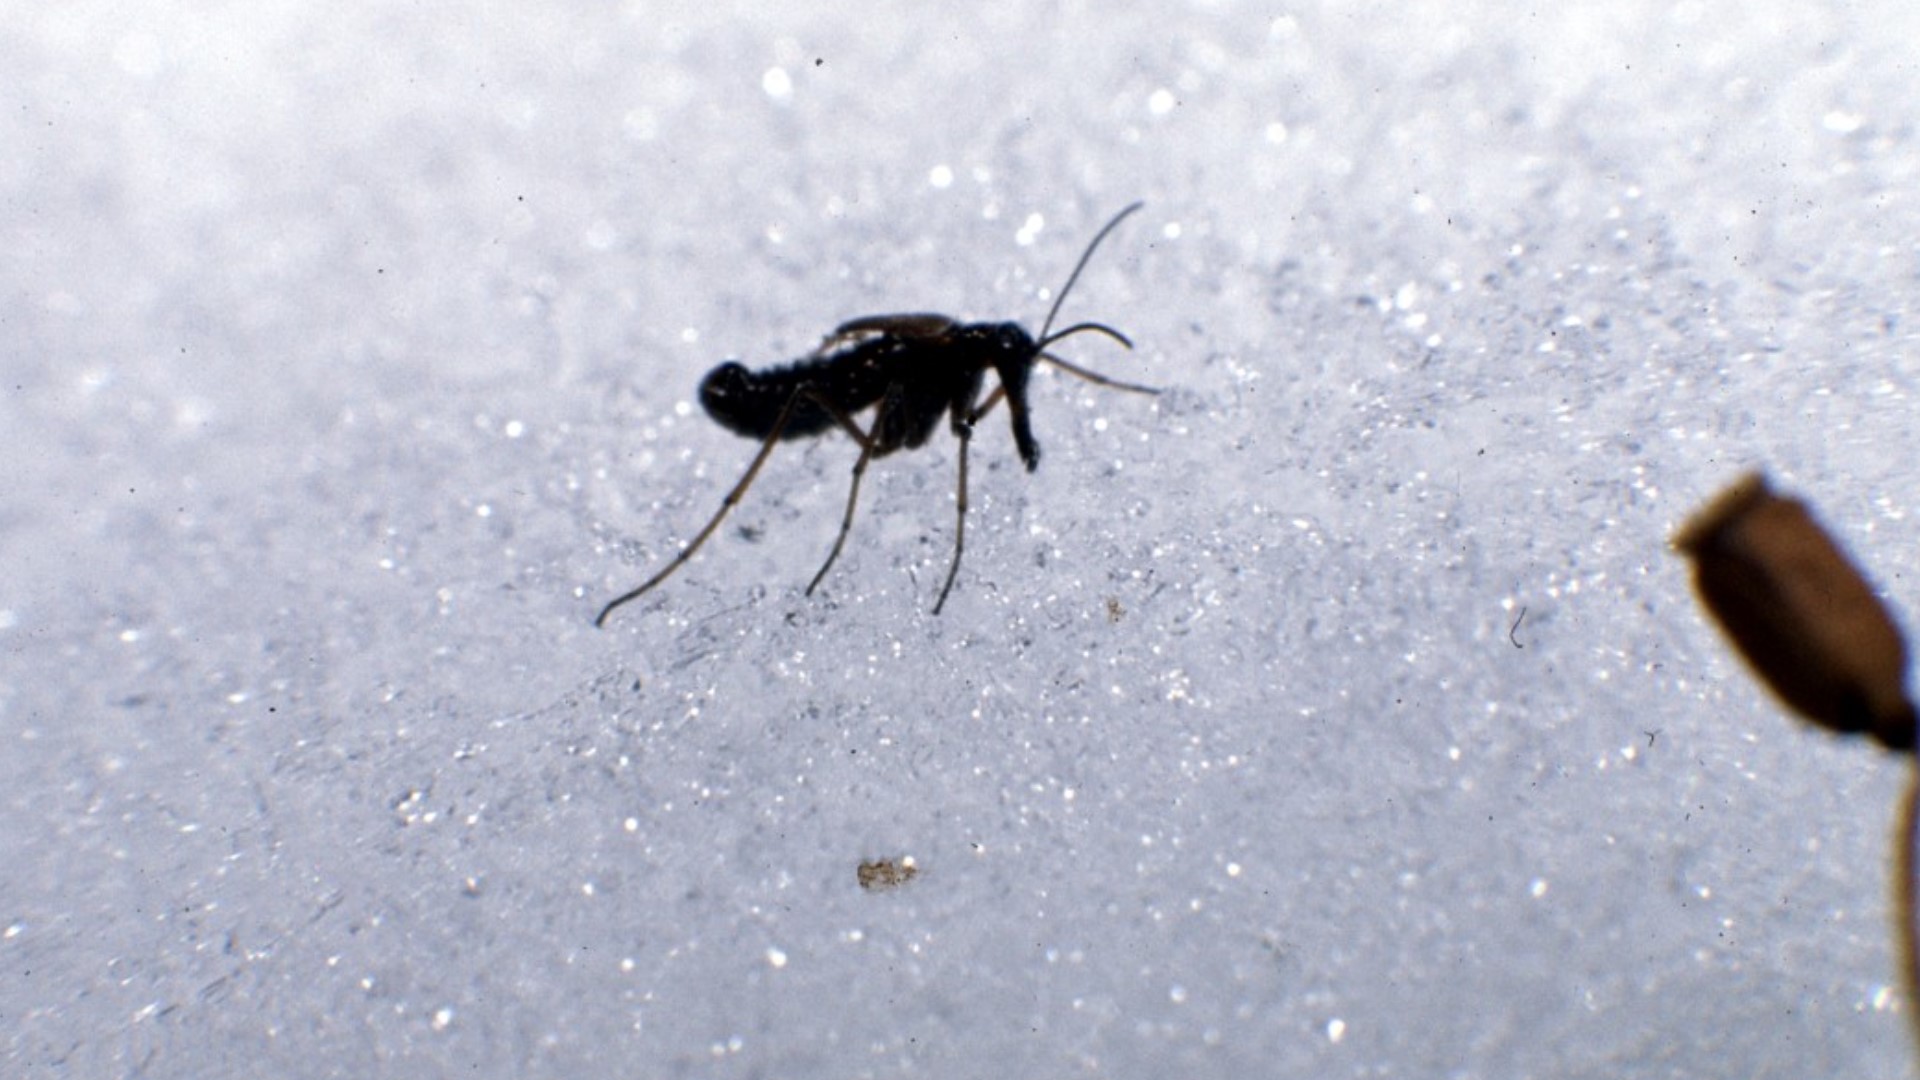 The snow fleas are not harmful to humans or pets.